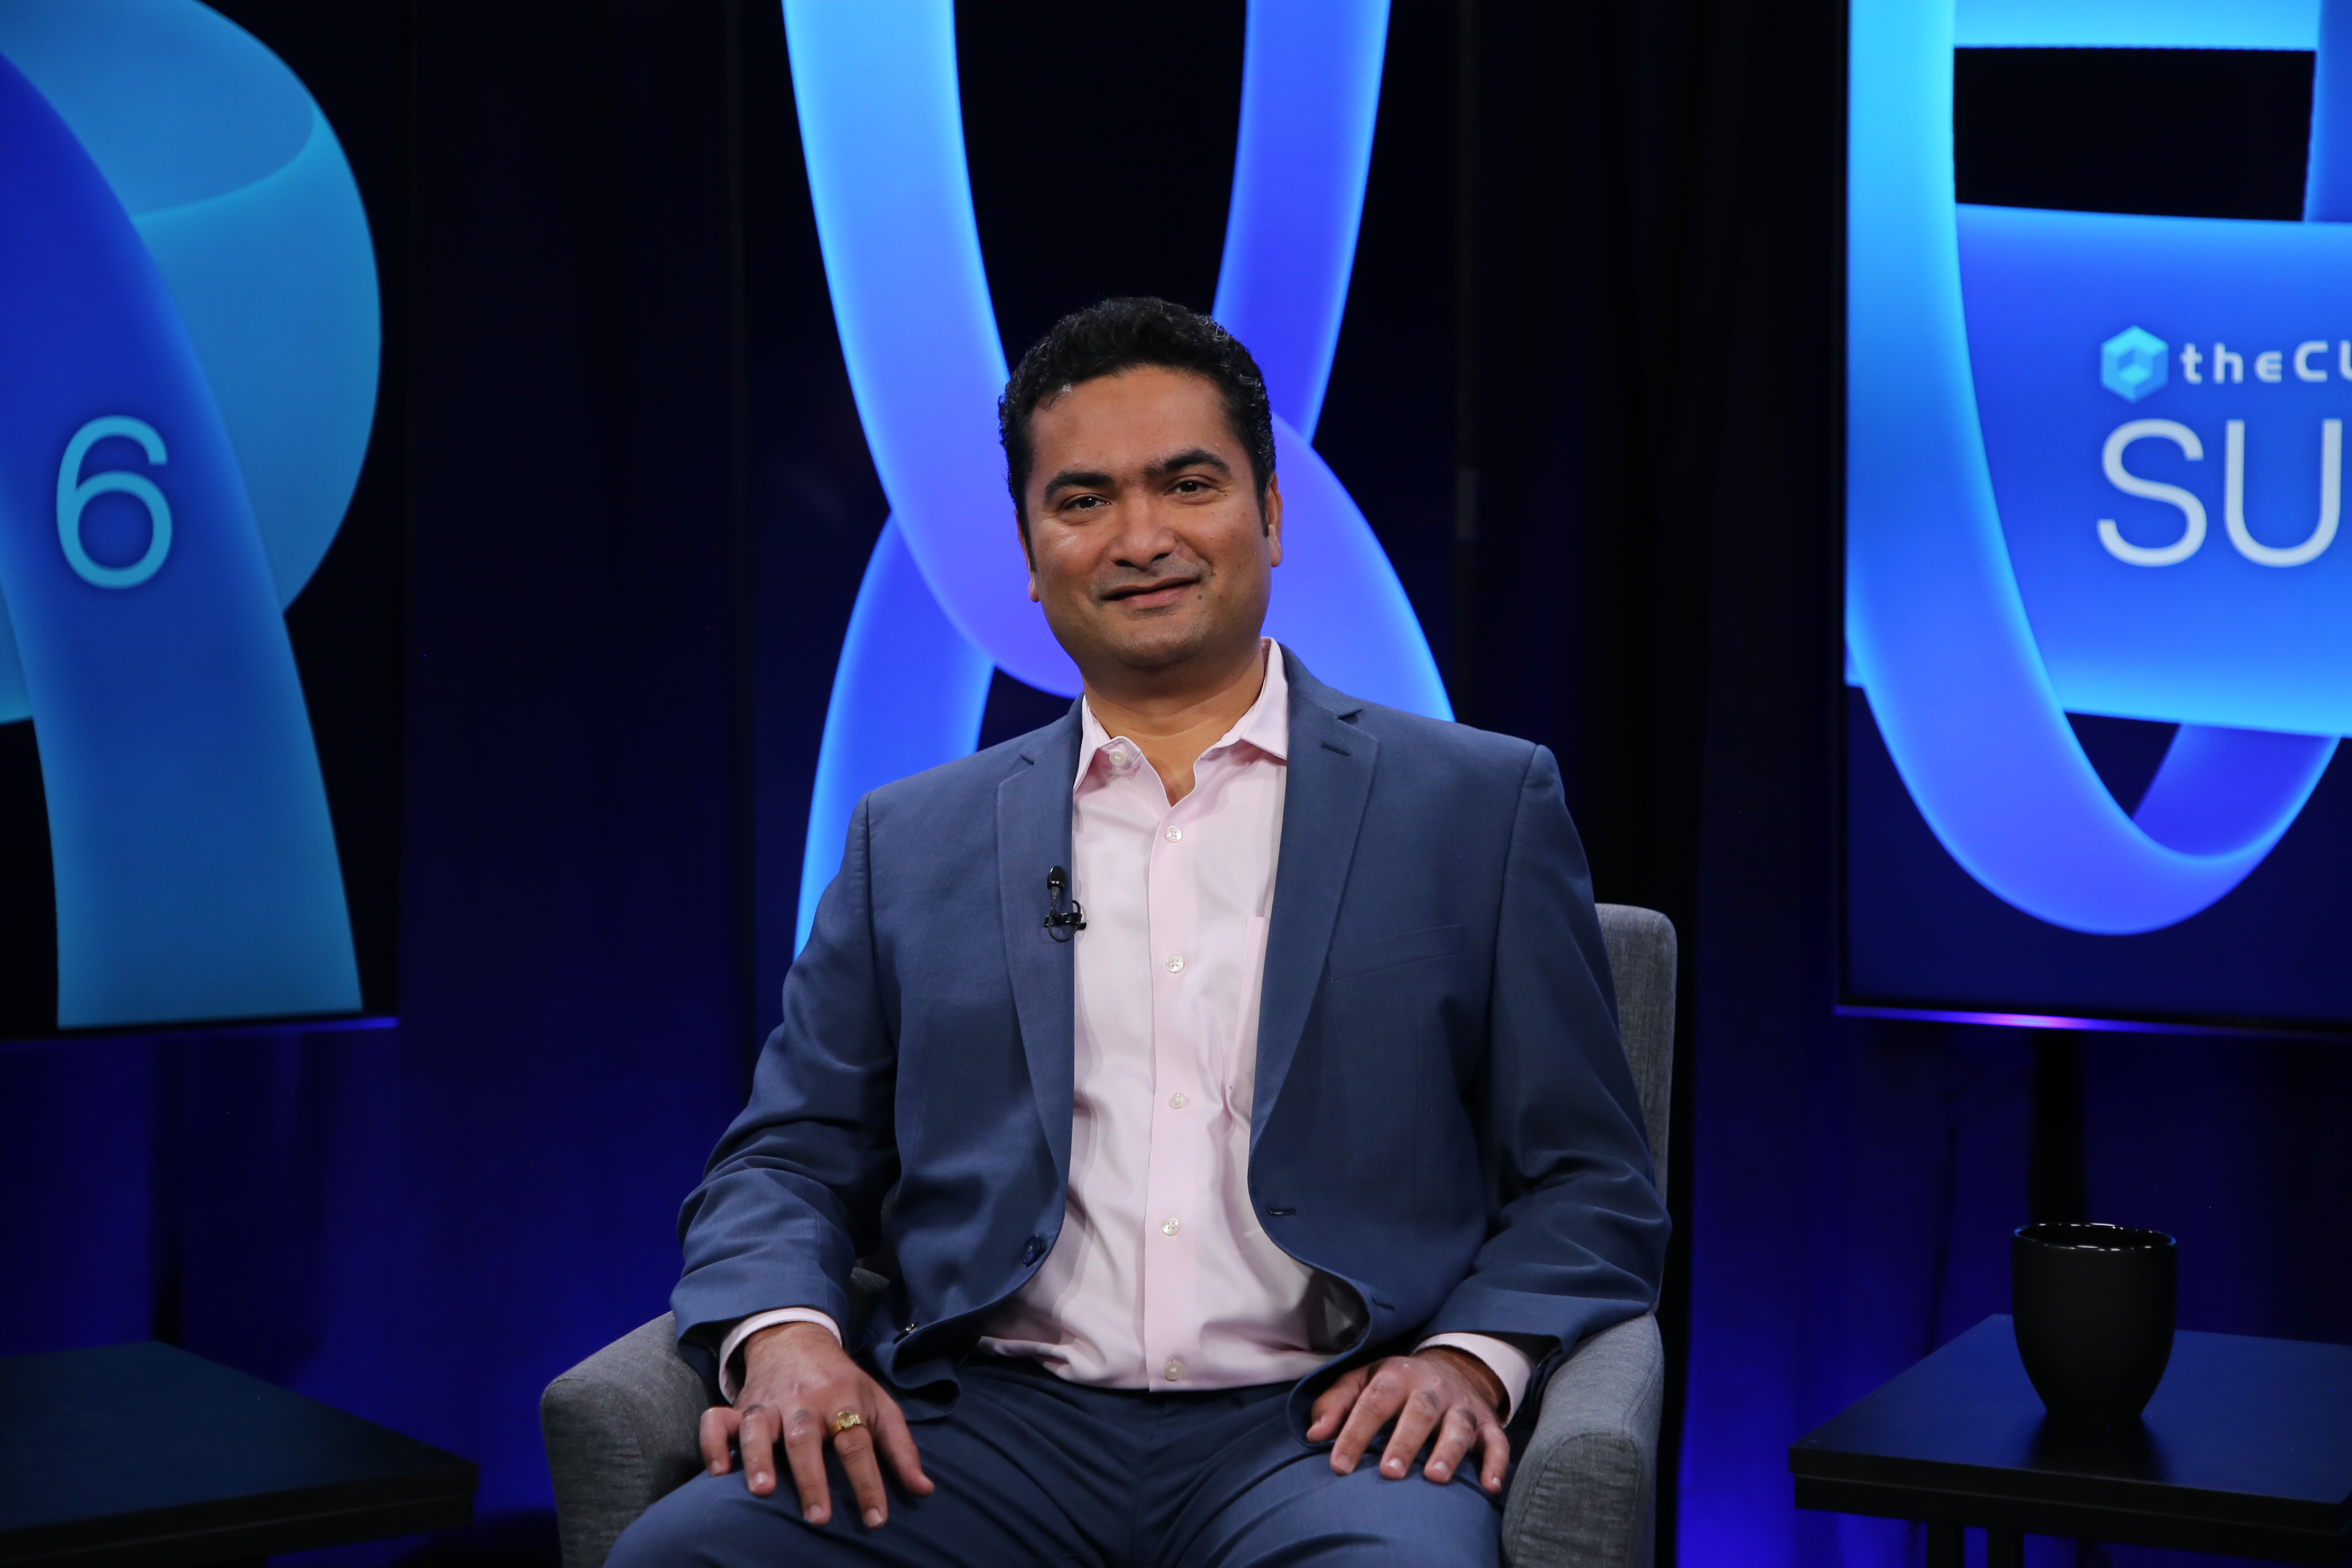 Deepen Desai (pictured), chief security officer of Zscaler, discussed the integration of zero-trust principles with generative AI to enhance cybersecurity, focusing on innovative strategies for threat detection, data classification and security model enhancements during Supercloud 6.